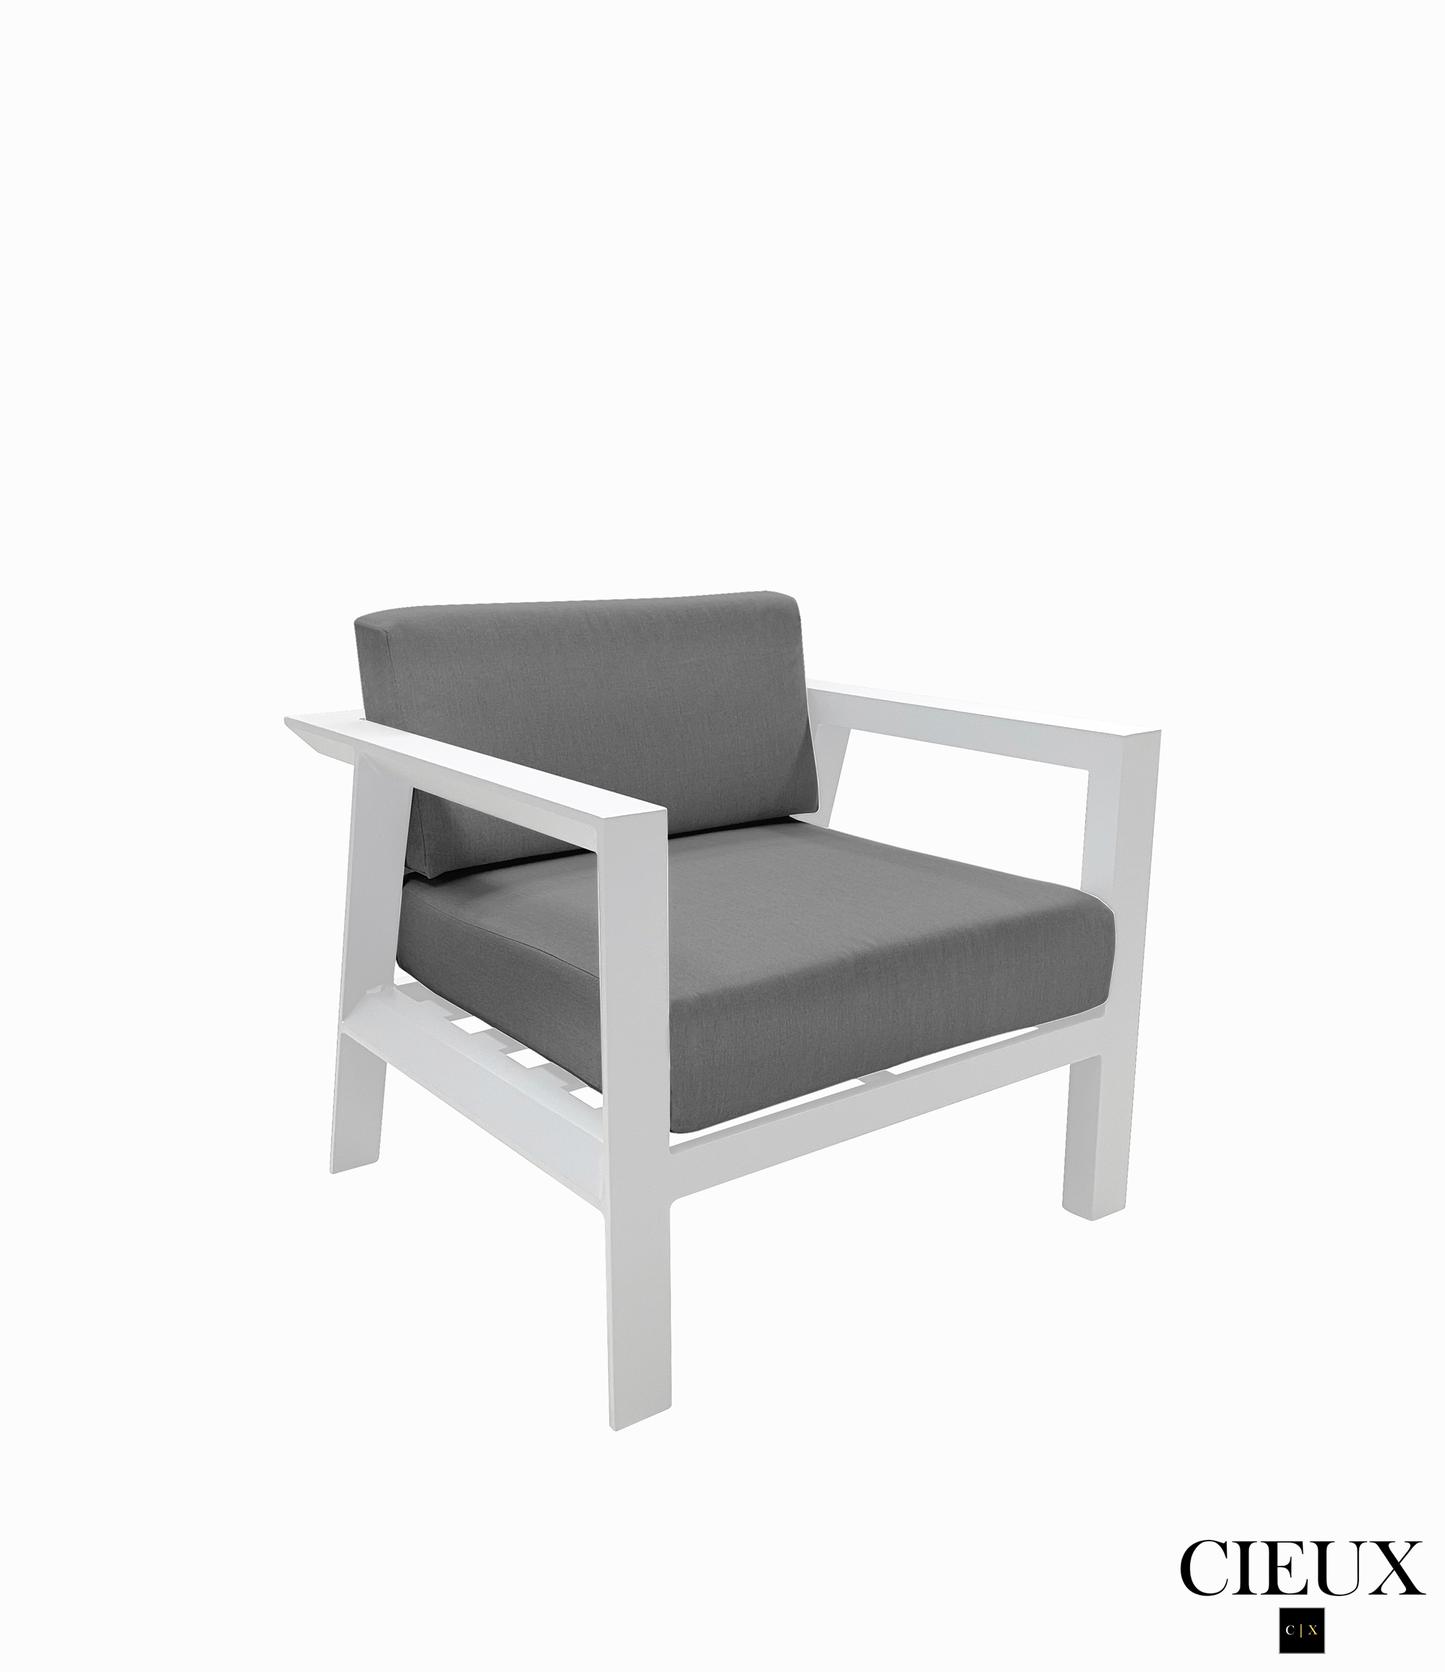 Pending - Cieux Canvas Charcoal Corsica Outdoor Patio Aluminum Metal Club Chair in White with Sunbrella Cushions - Available in 2 Colours